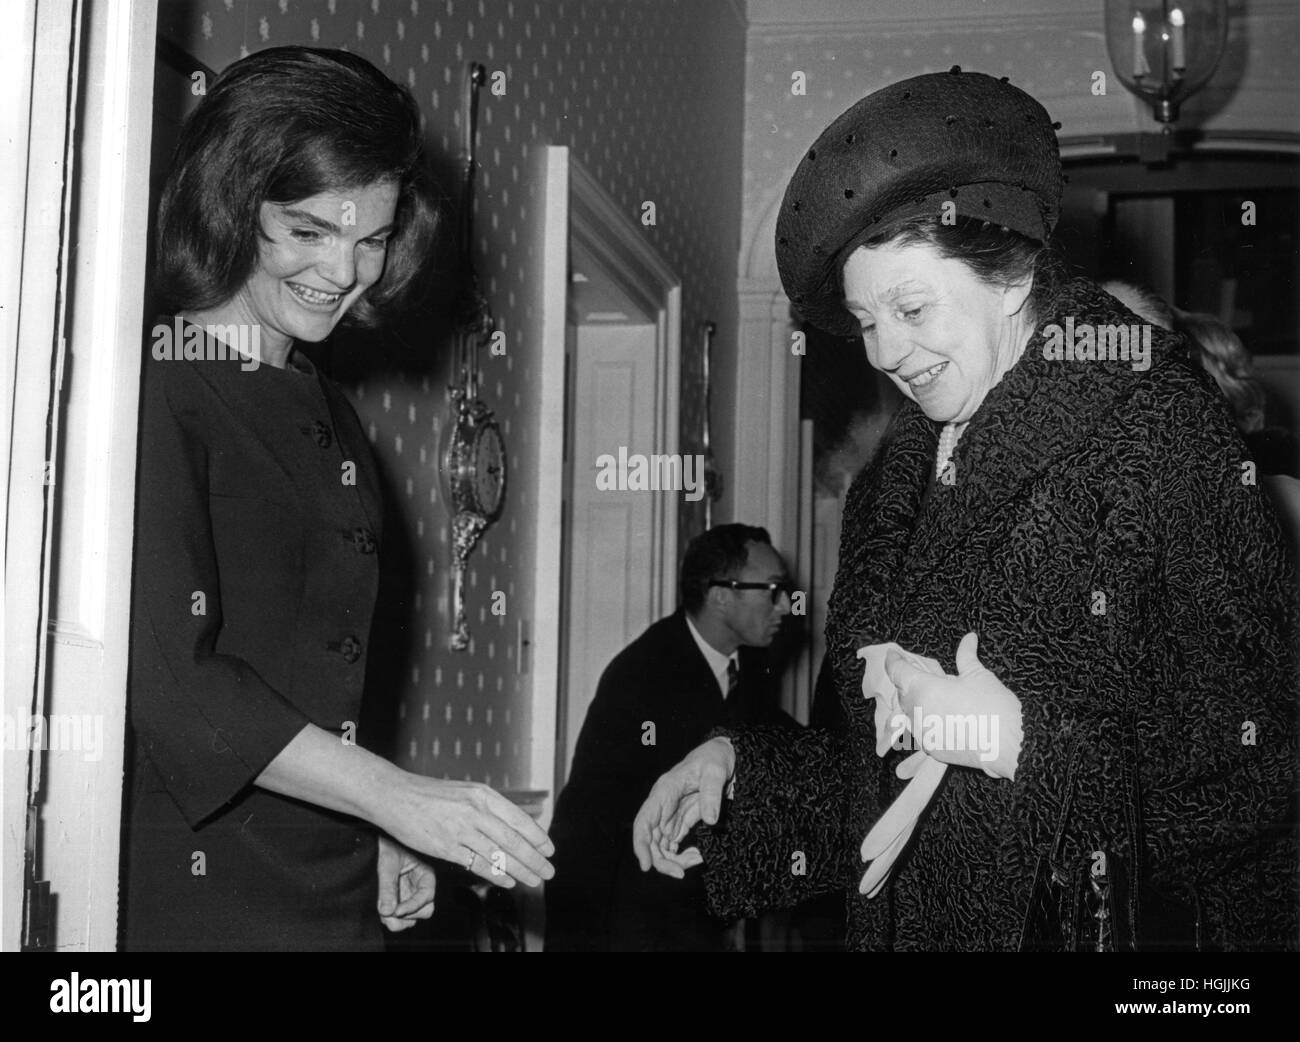 Former first lady Jacqueline Bouvier Kennedy, left, welcomes Laura Carta Camprino, wife of President Antonio Segni of Italy, right, to her Georgetown home in Washington, DC on January 14, 1964. Mrs. Segni had tea with the former first lady for a half hour while her husband met with United States President Lyndon B. Johnson at the White House. Credit: Benjamin E. 'Gene' Forte/CNP - NO WIRE SERVICE - Photo: Benjamin E. 'gene' Forte/Consolidated News Photos/Benjamin E. 'Gene' Forte - CNP Stock Photo